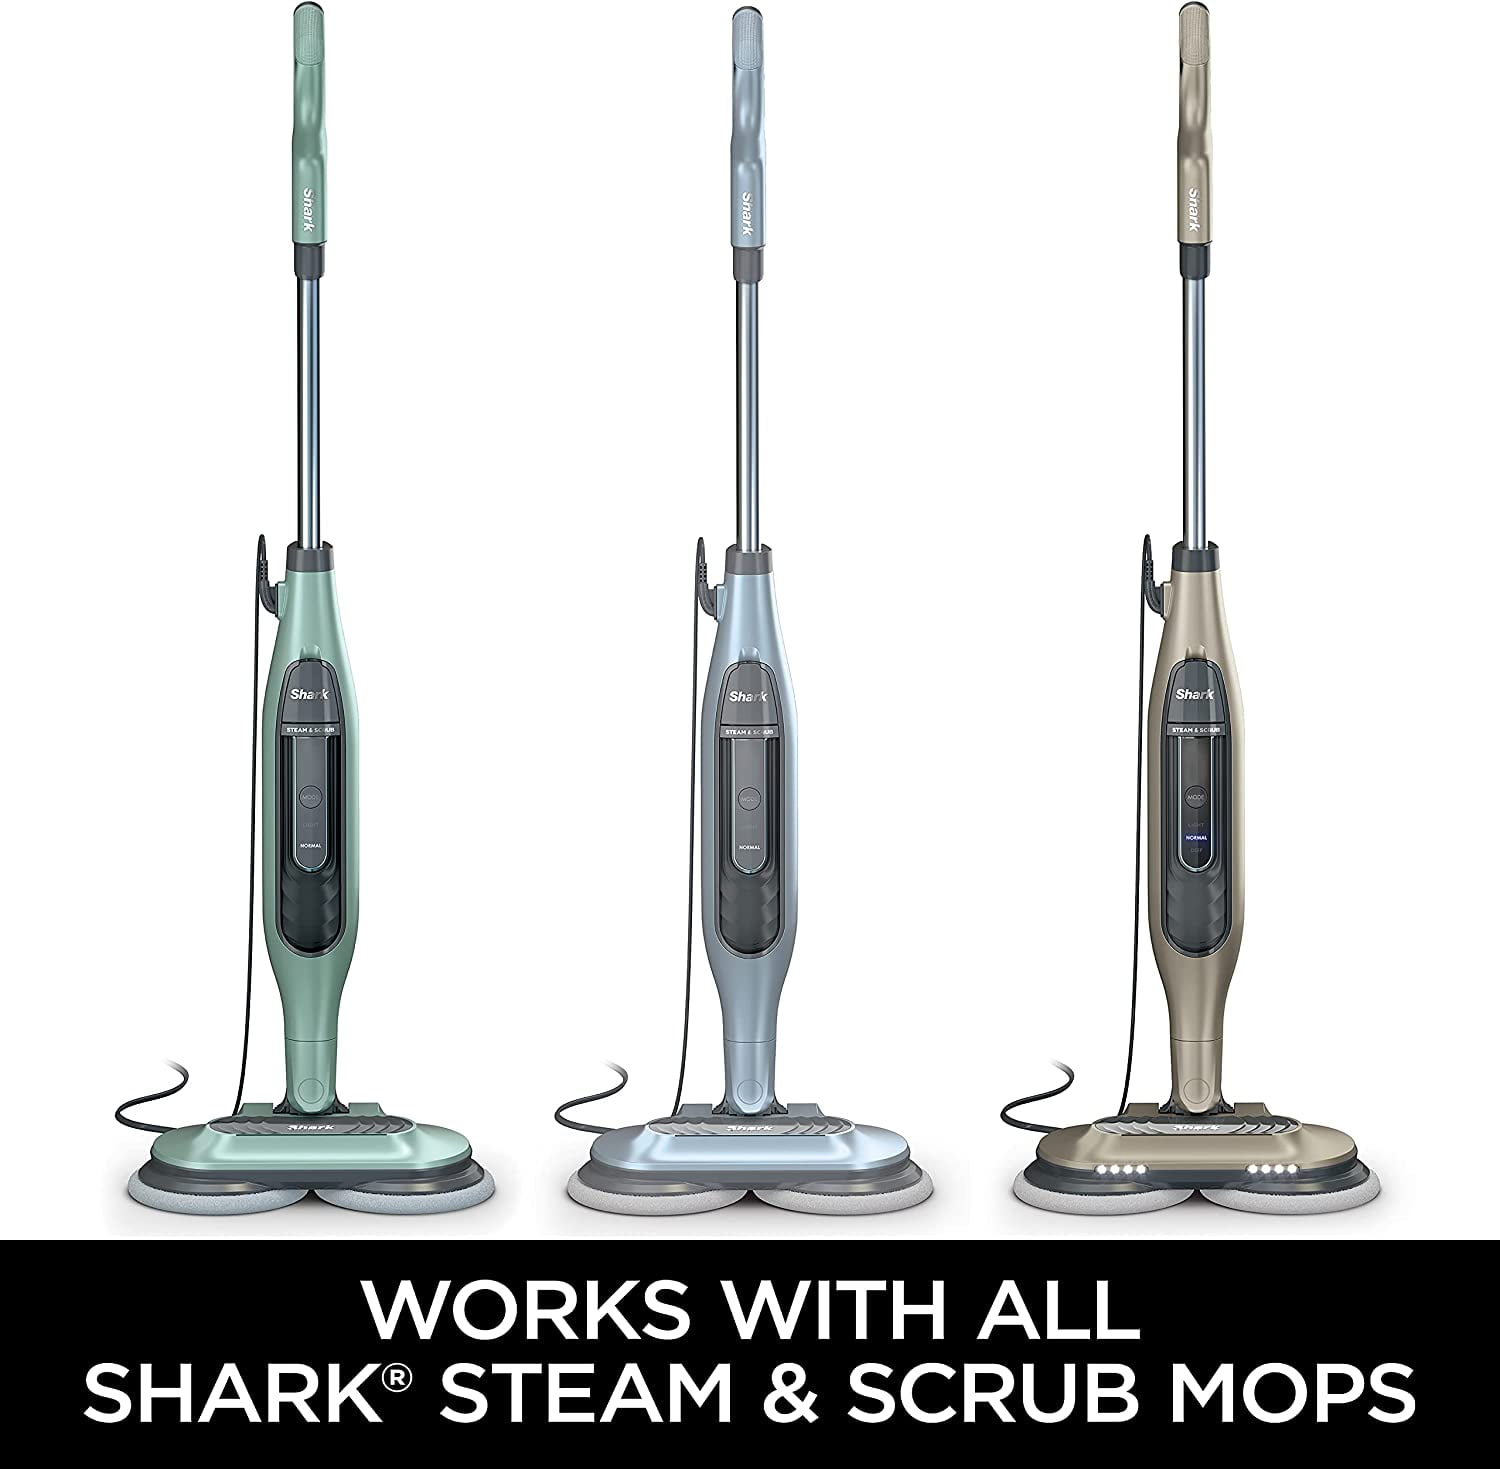 Getting Started with the Shark® Steam & Scrub 